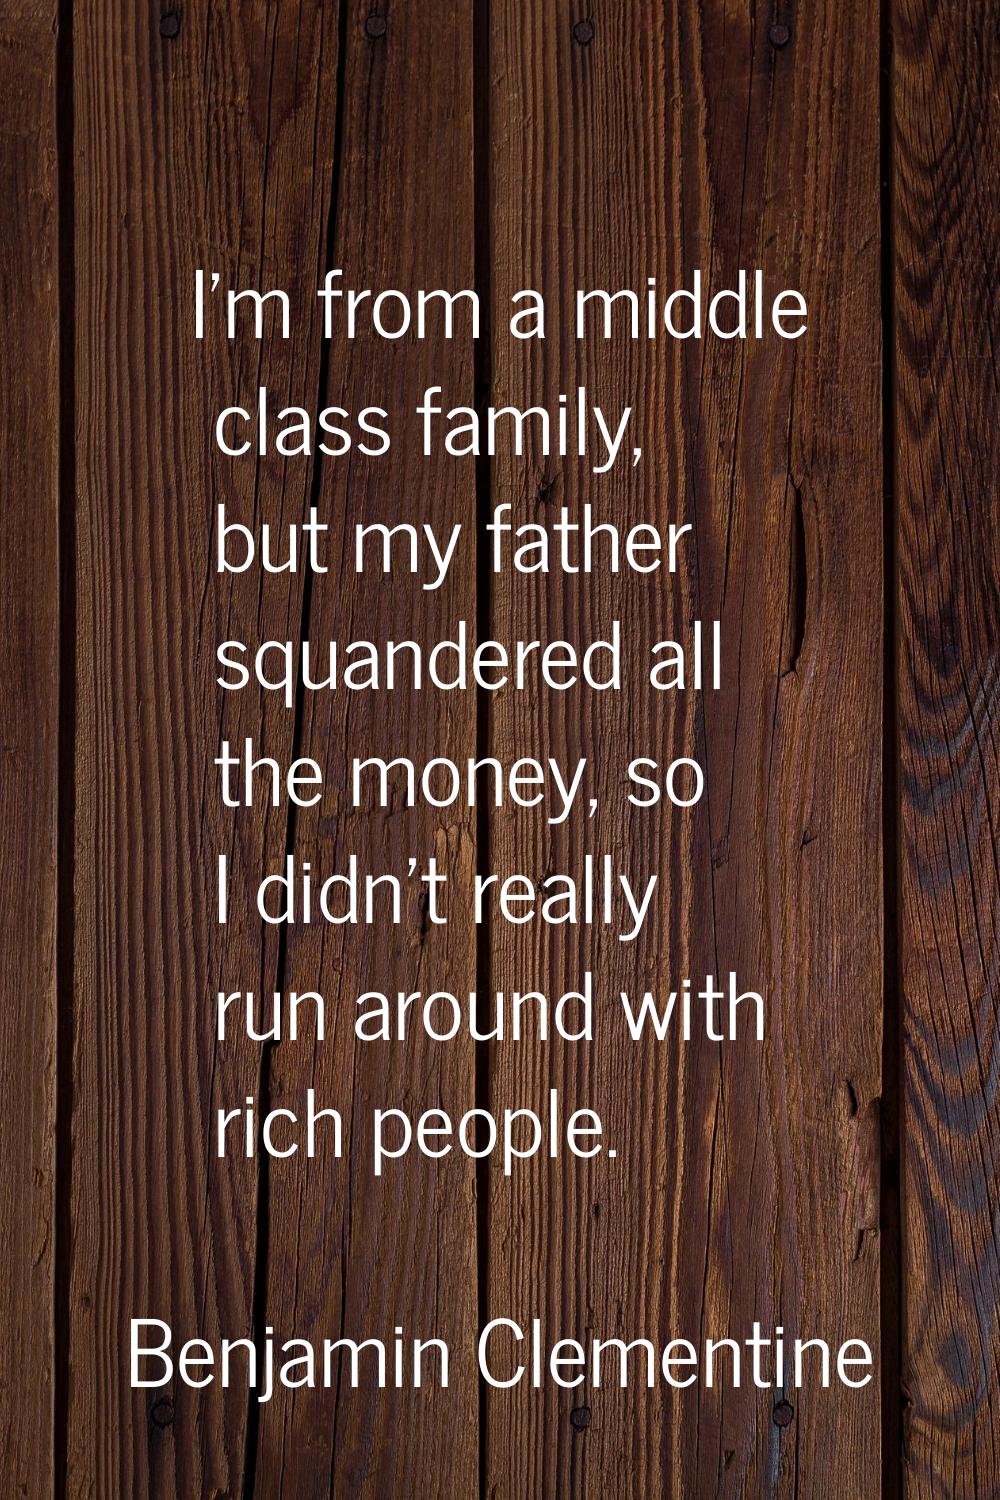 I'm from a middle class family, but my father squandered all the money, so I didn't really run arou